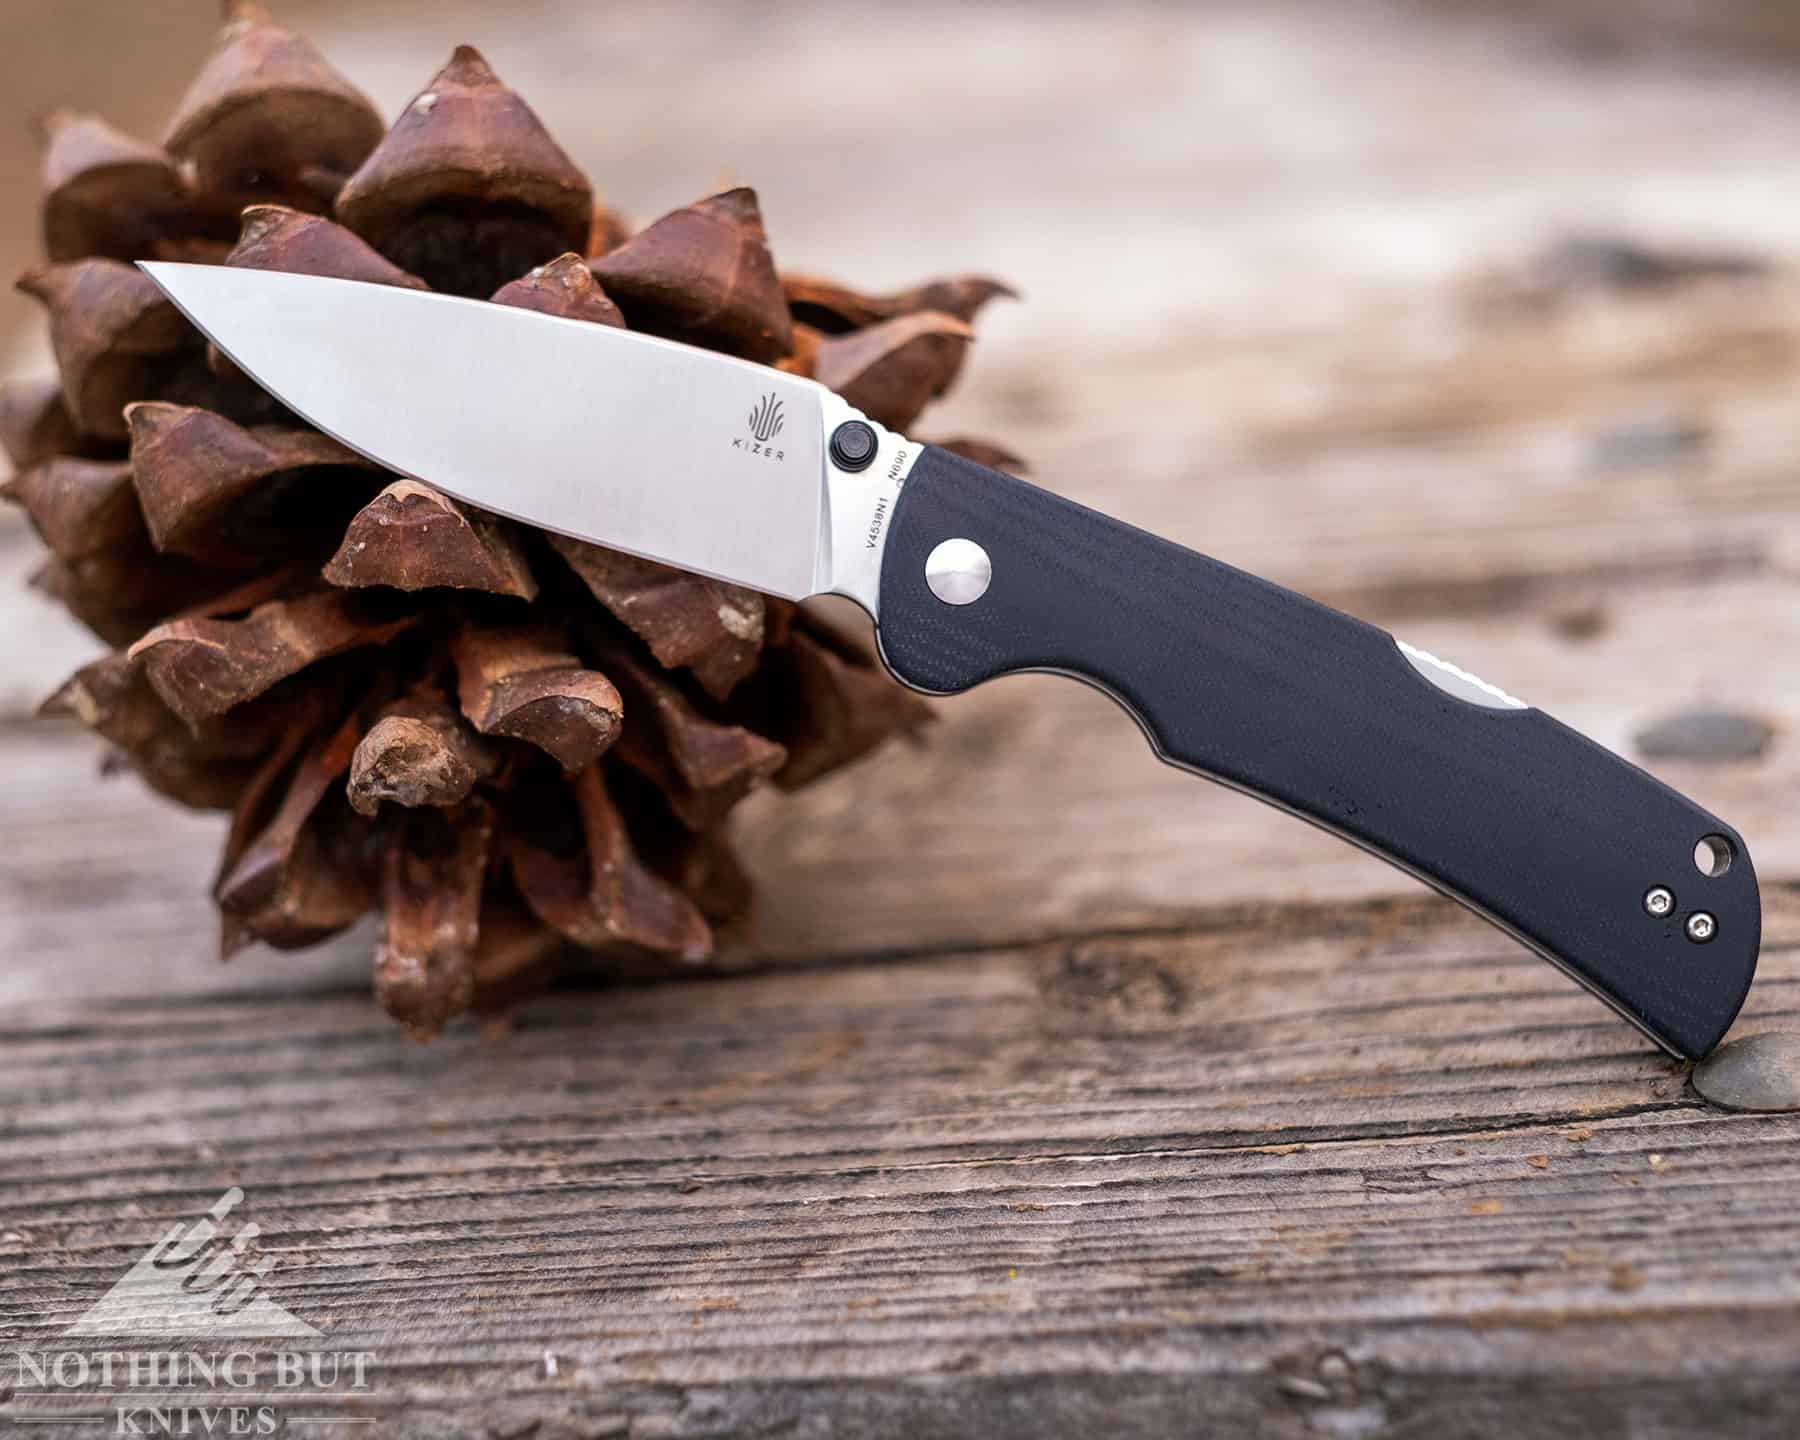 The Kizer Slicer offers impressive build quality and performance for the price. 